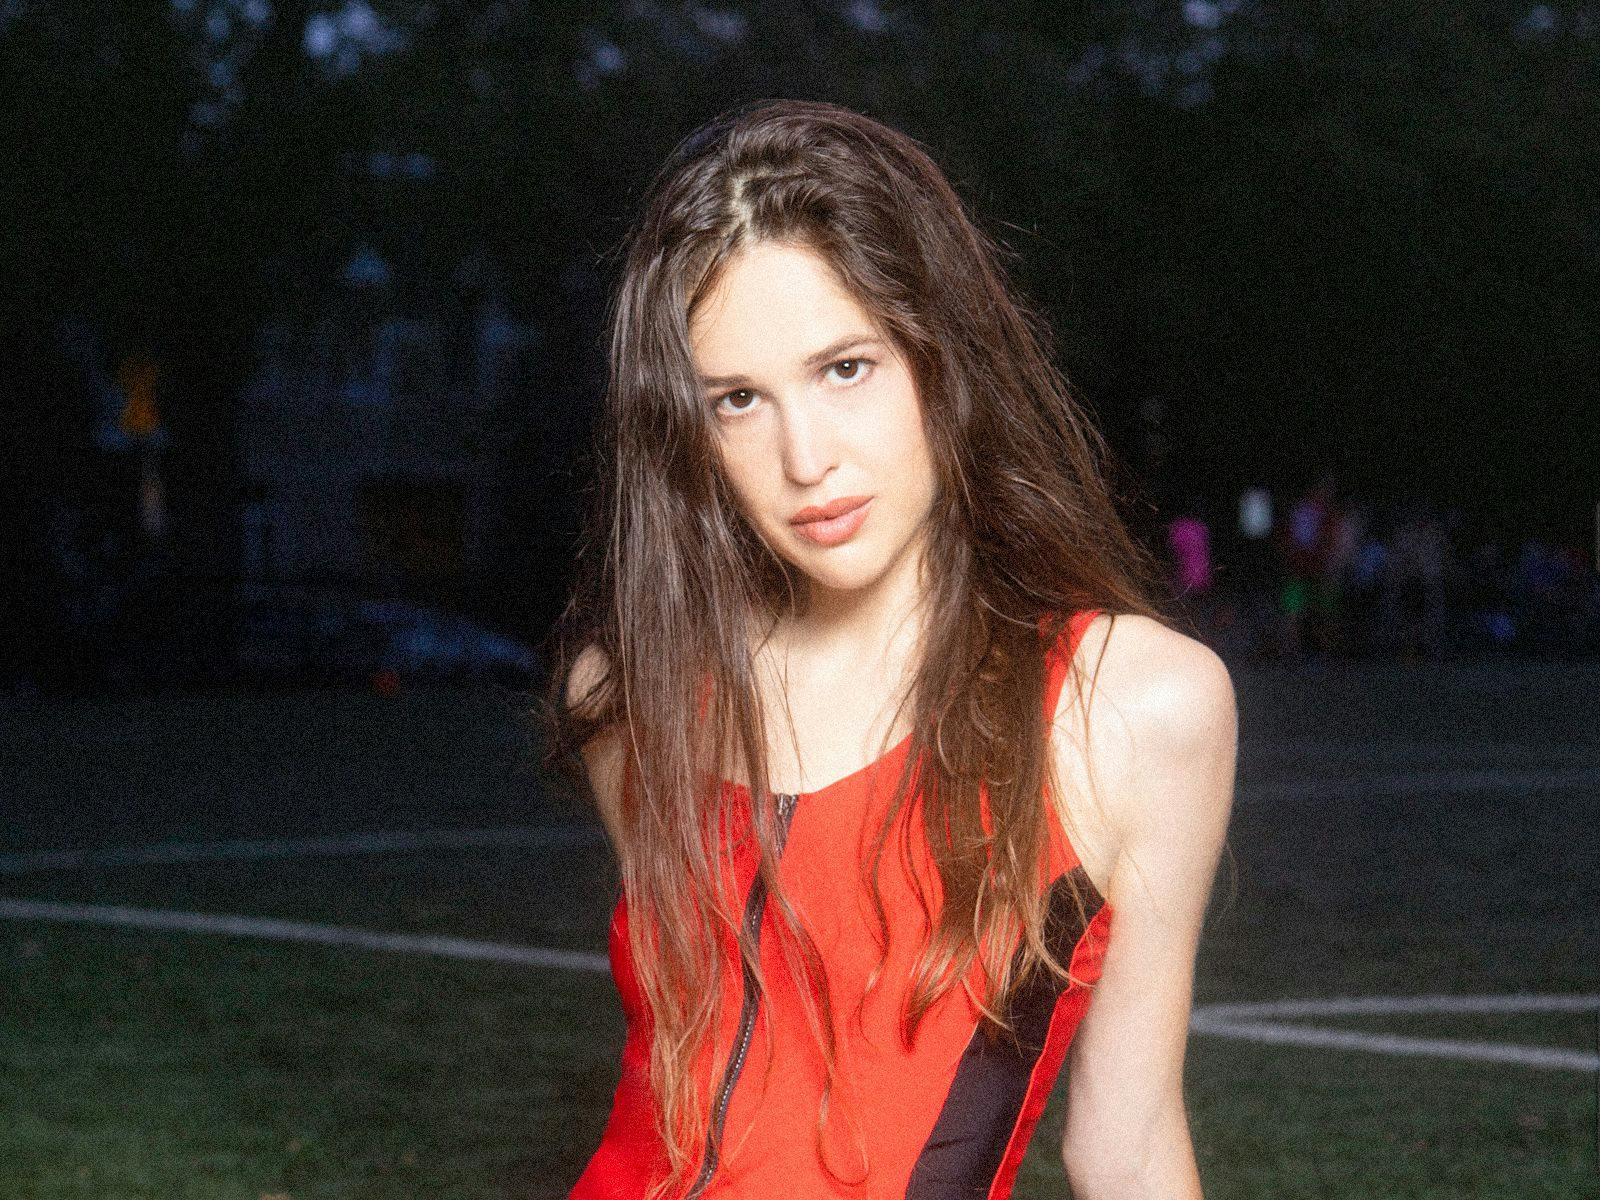 Marie Davidson sits on an outdoor sports field.